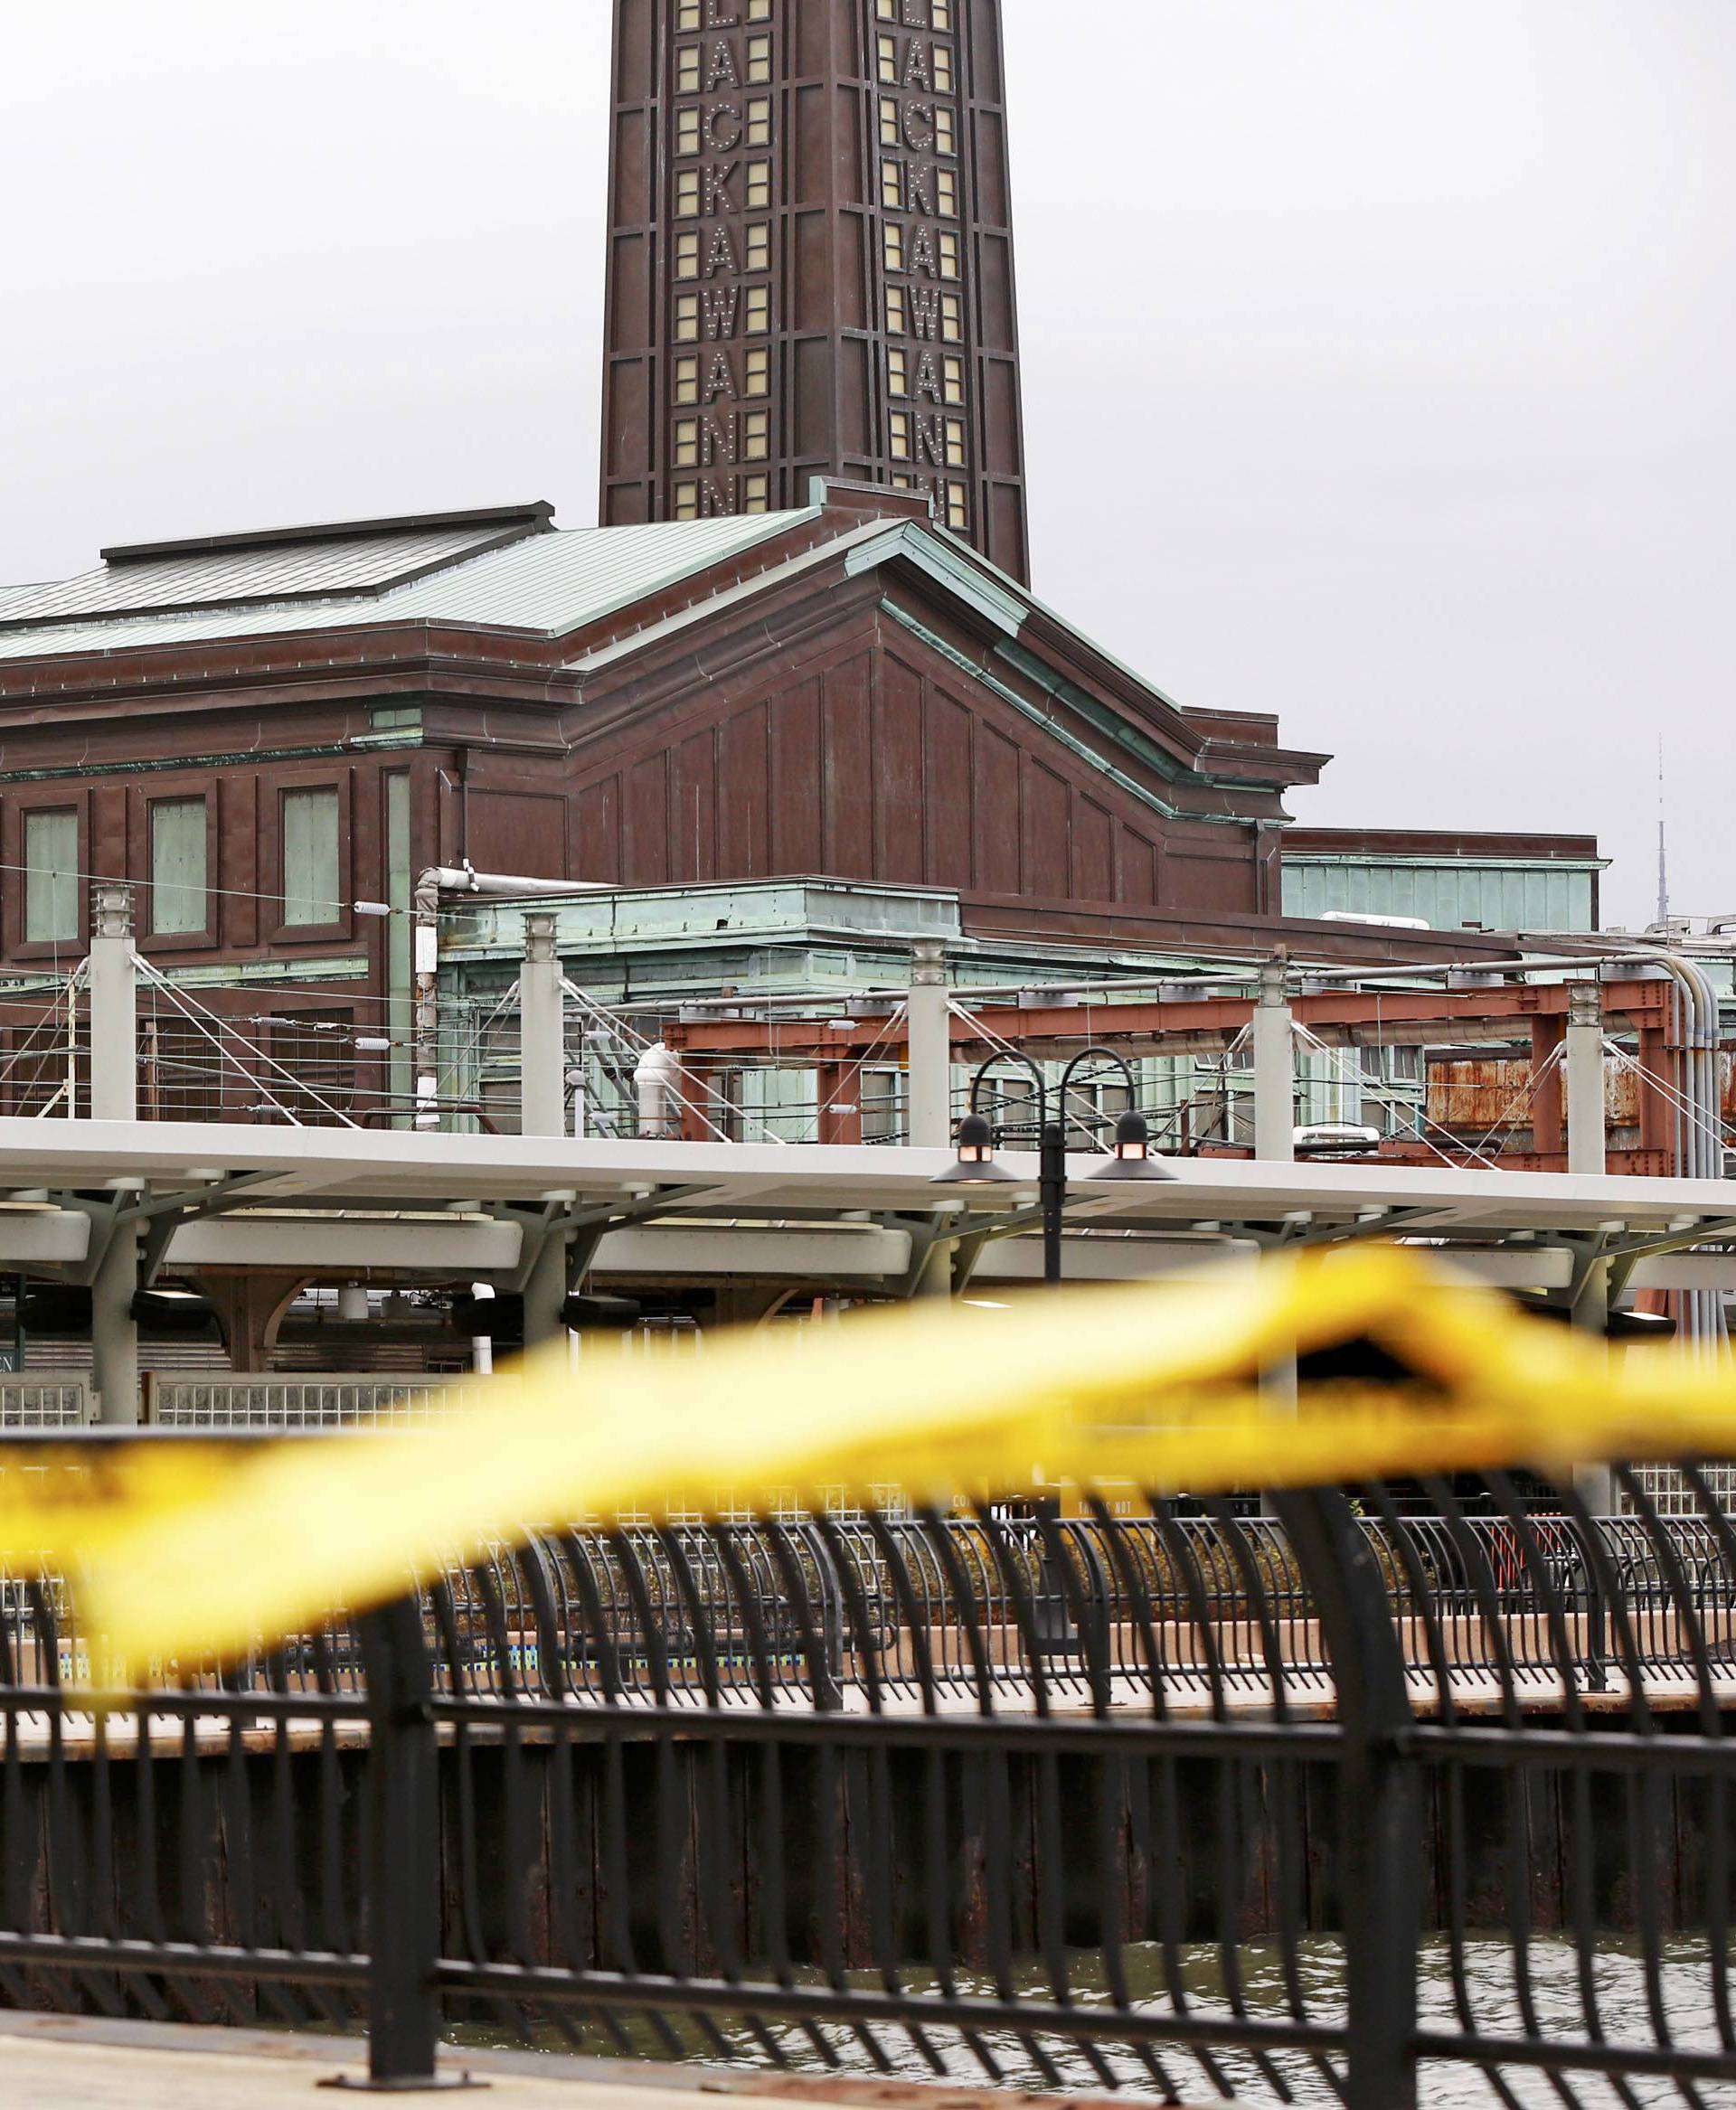 The Hoboken, New Jersey train station, scene of a train crash where a New Jersey Transit train derailed and crashed through the station, injuring more than 100 people, is pictured in Hoboken